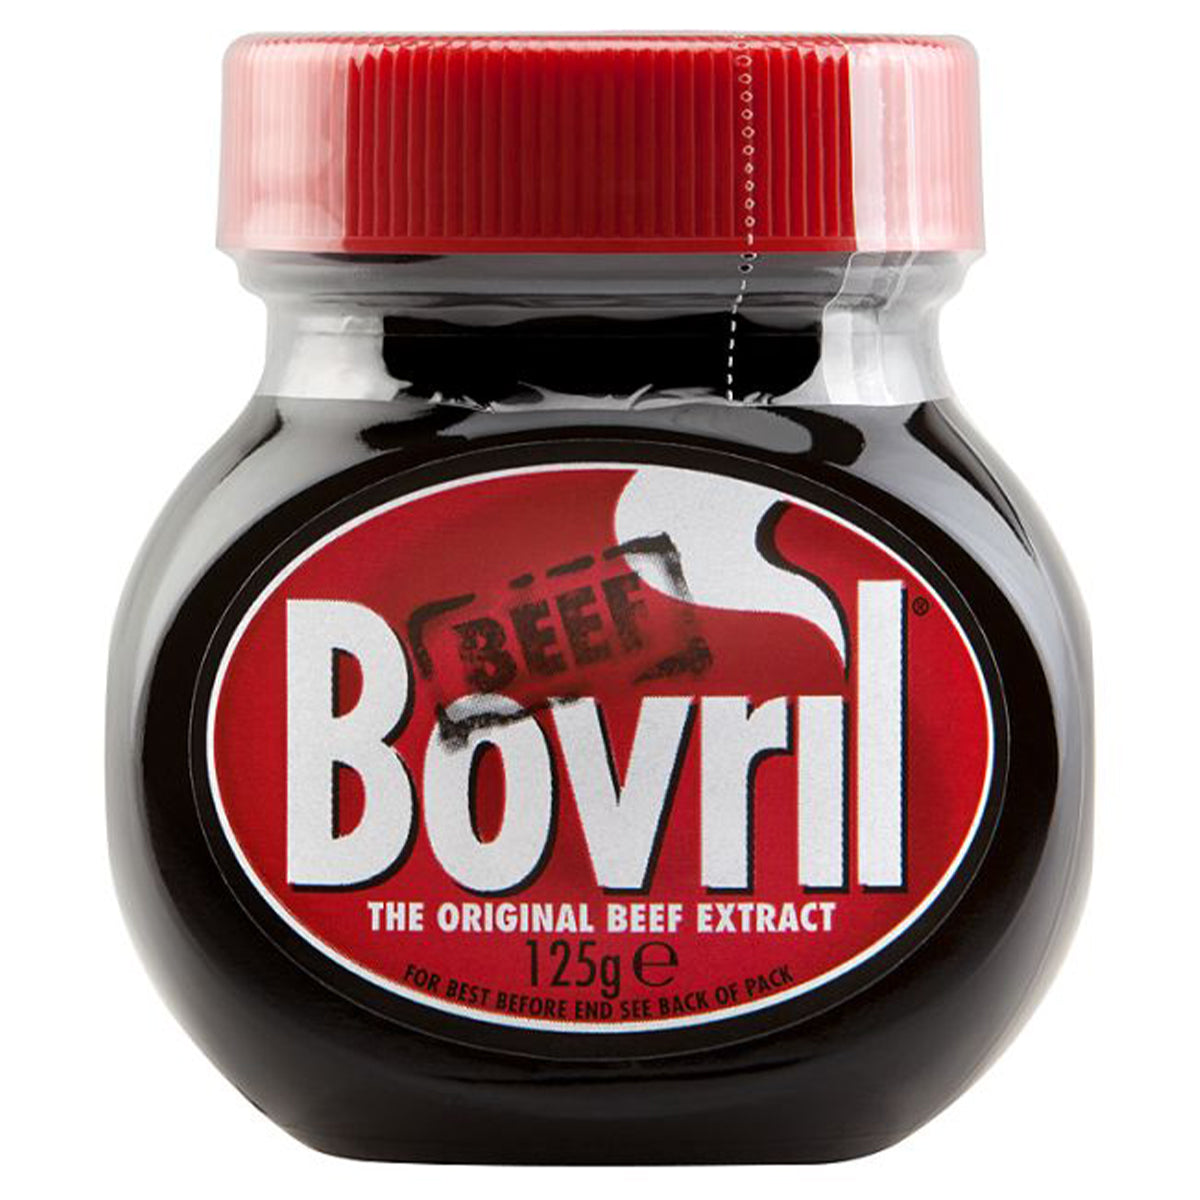 A jar of Bovril - Beef & Yeast Extract - 125g on a white background.